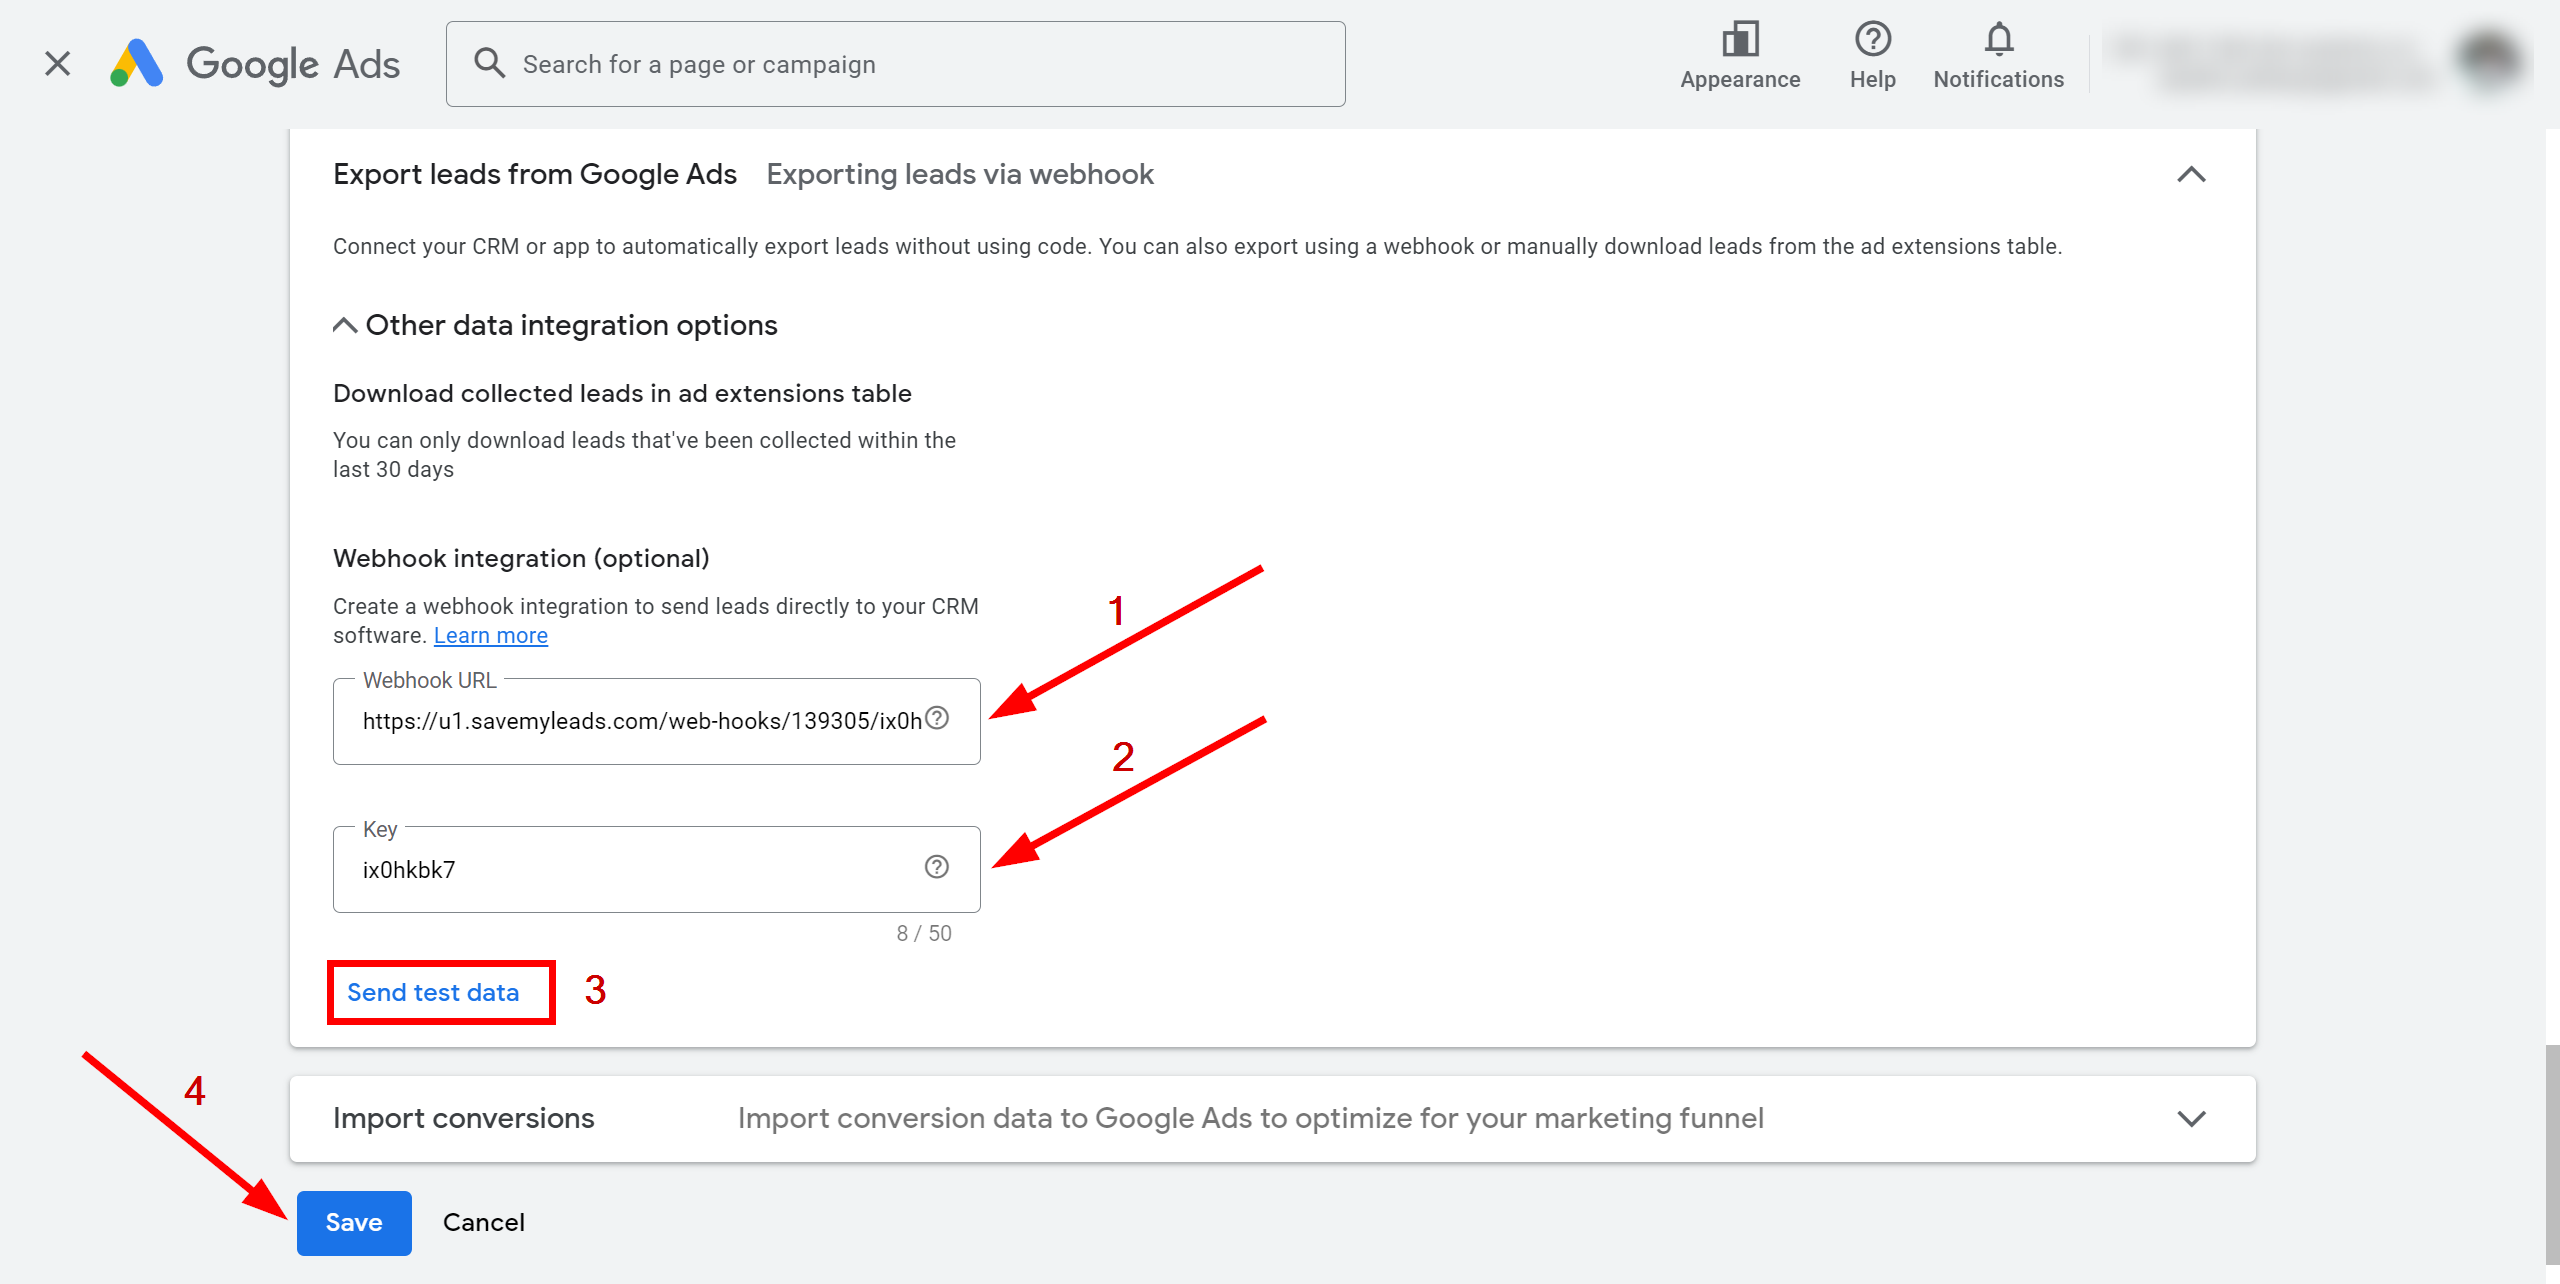 How to Connect Google Lead Form with Telesign | Data Source account connection